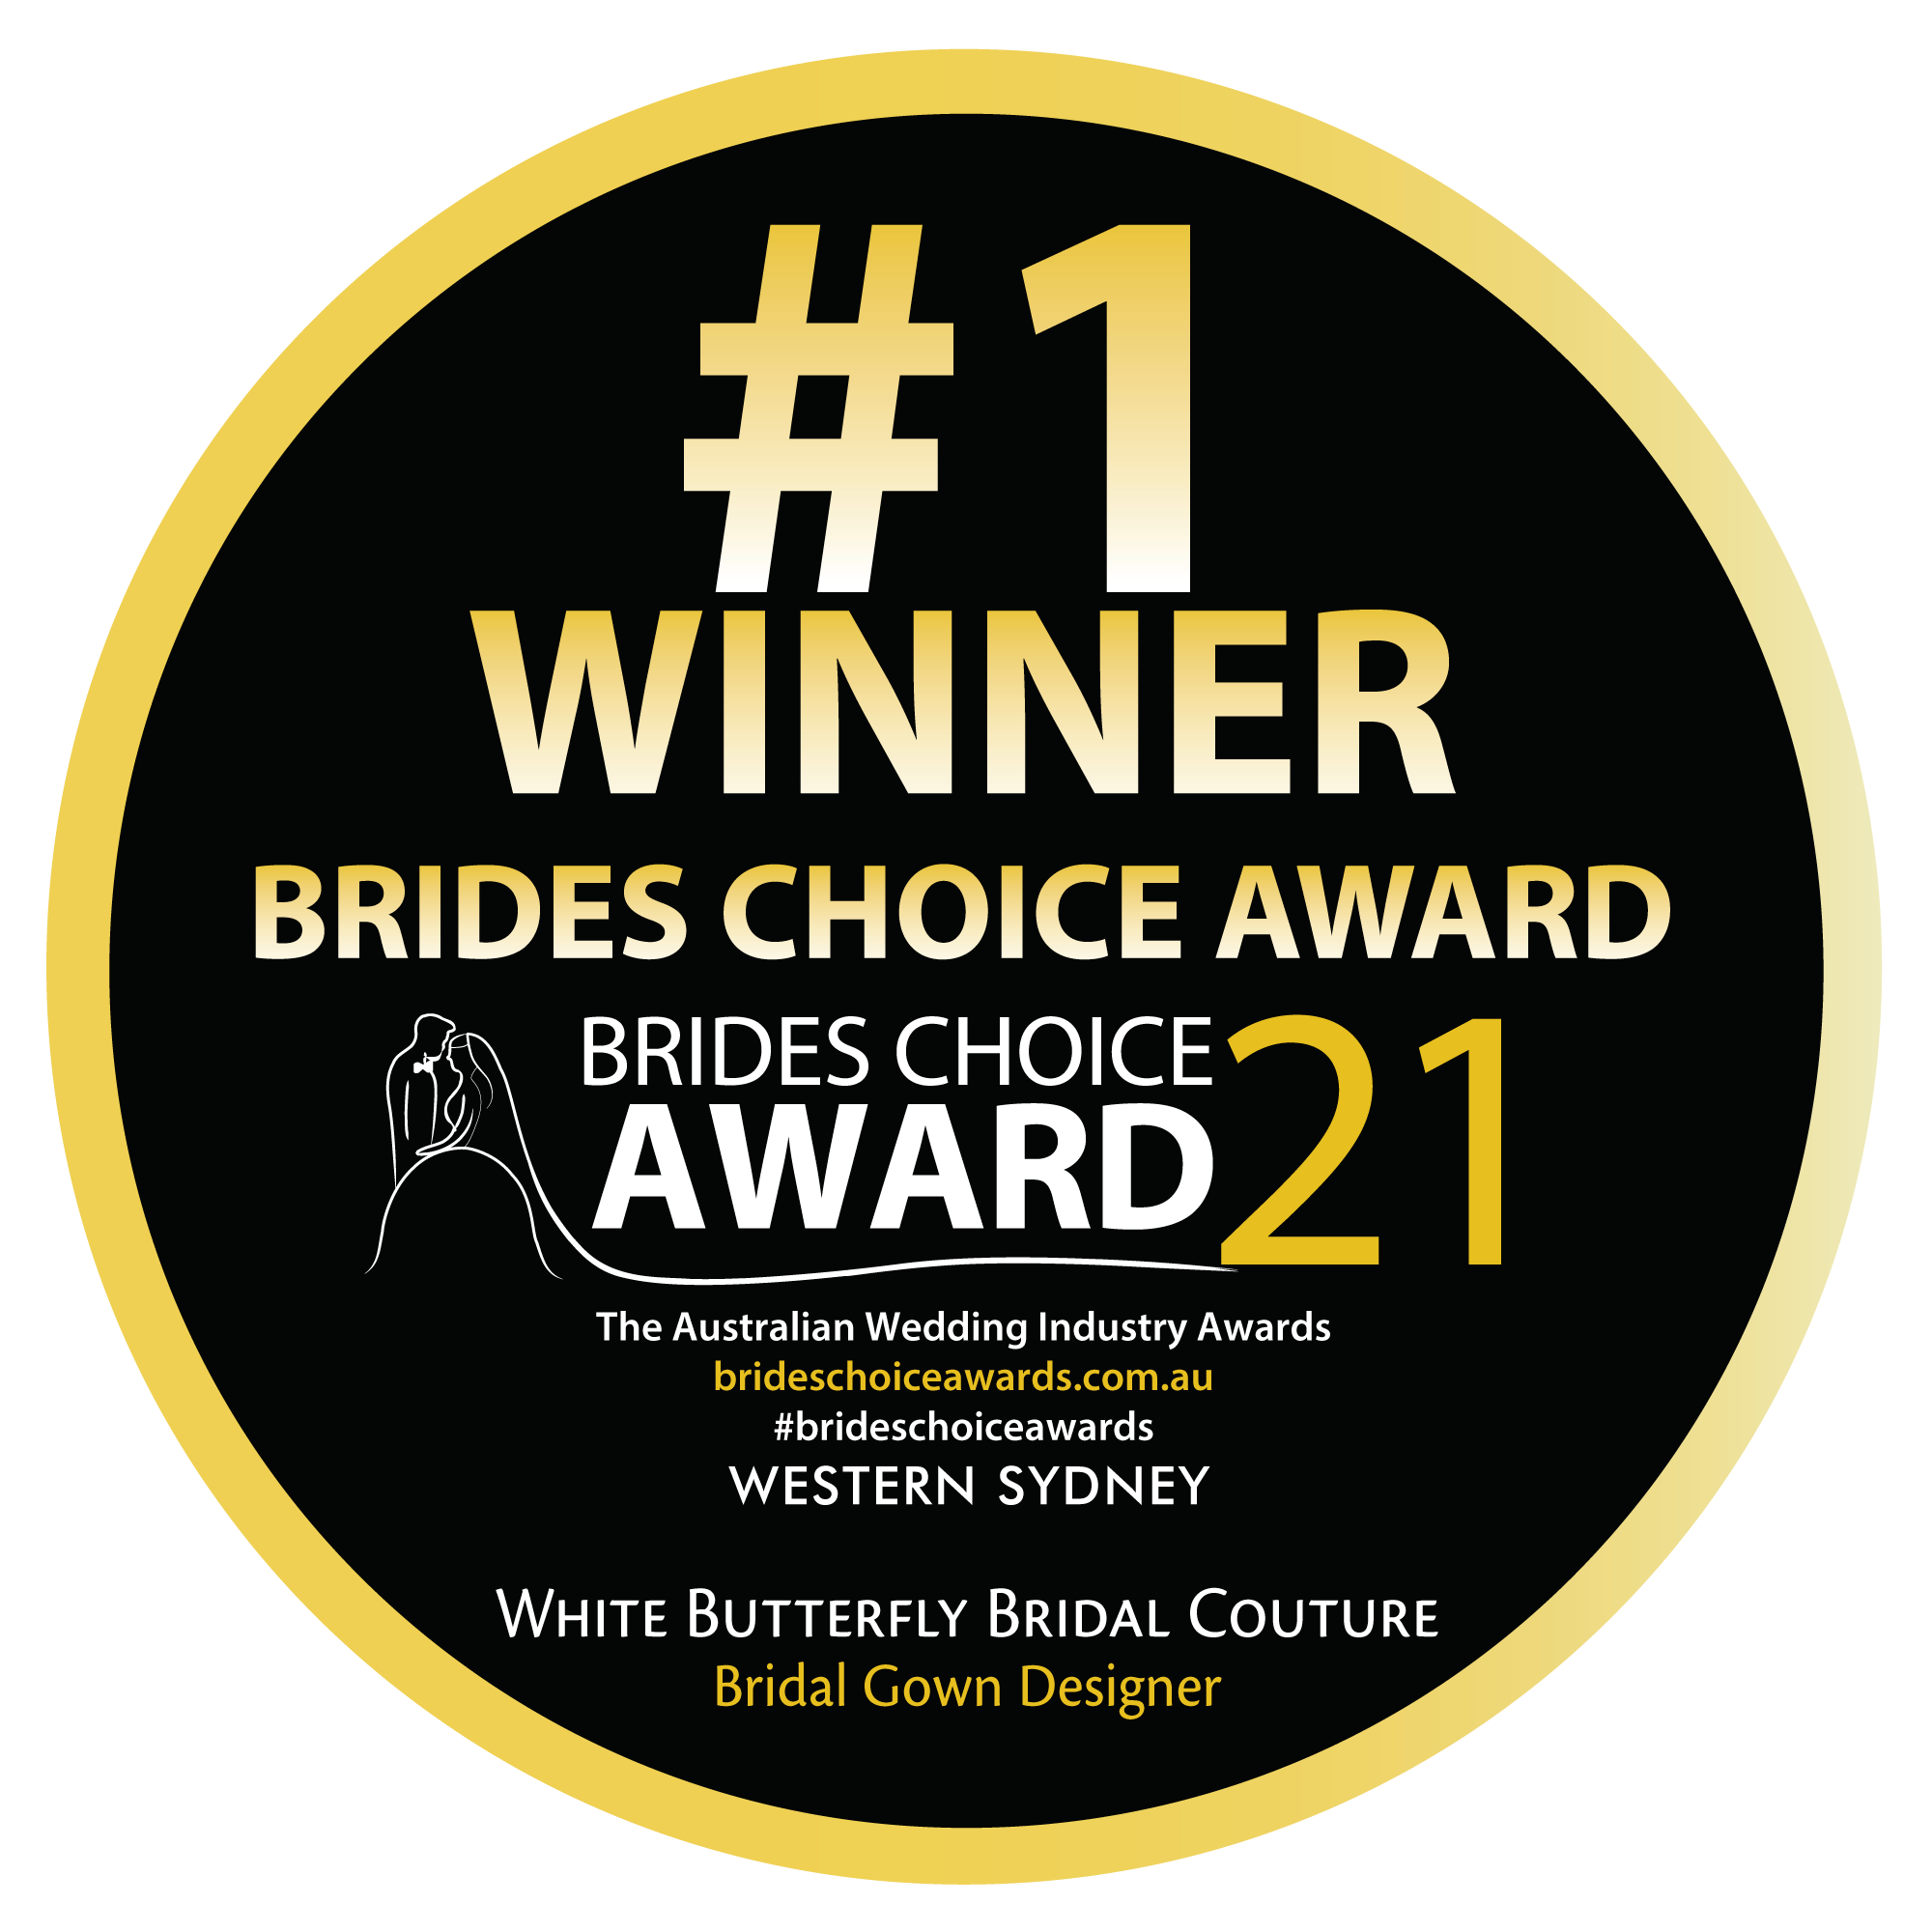 White-Butterfly-Bridal-Couture-WS-Winner.png